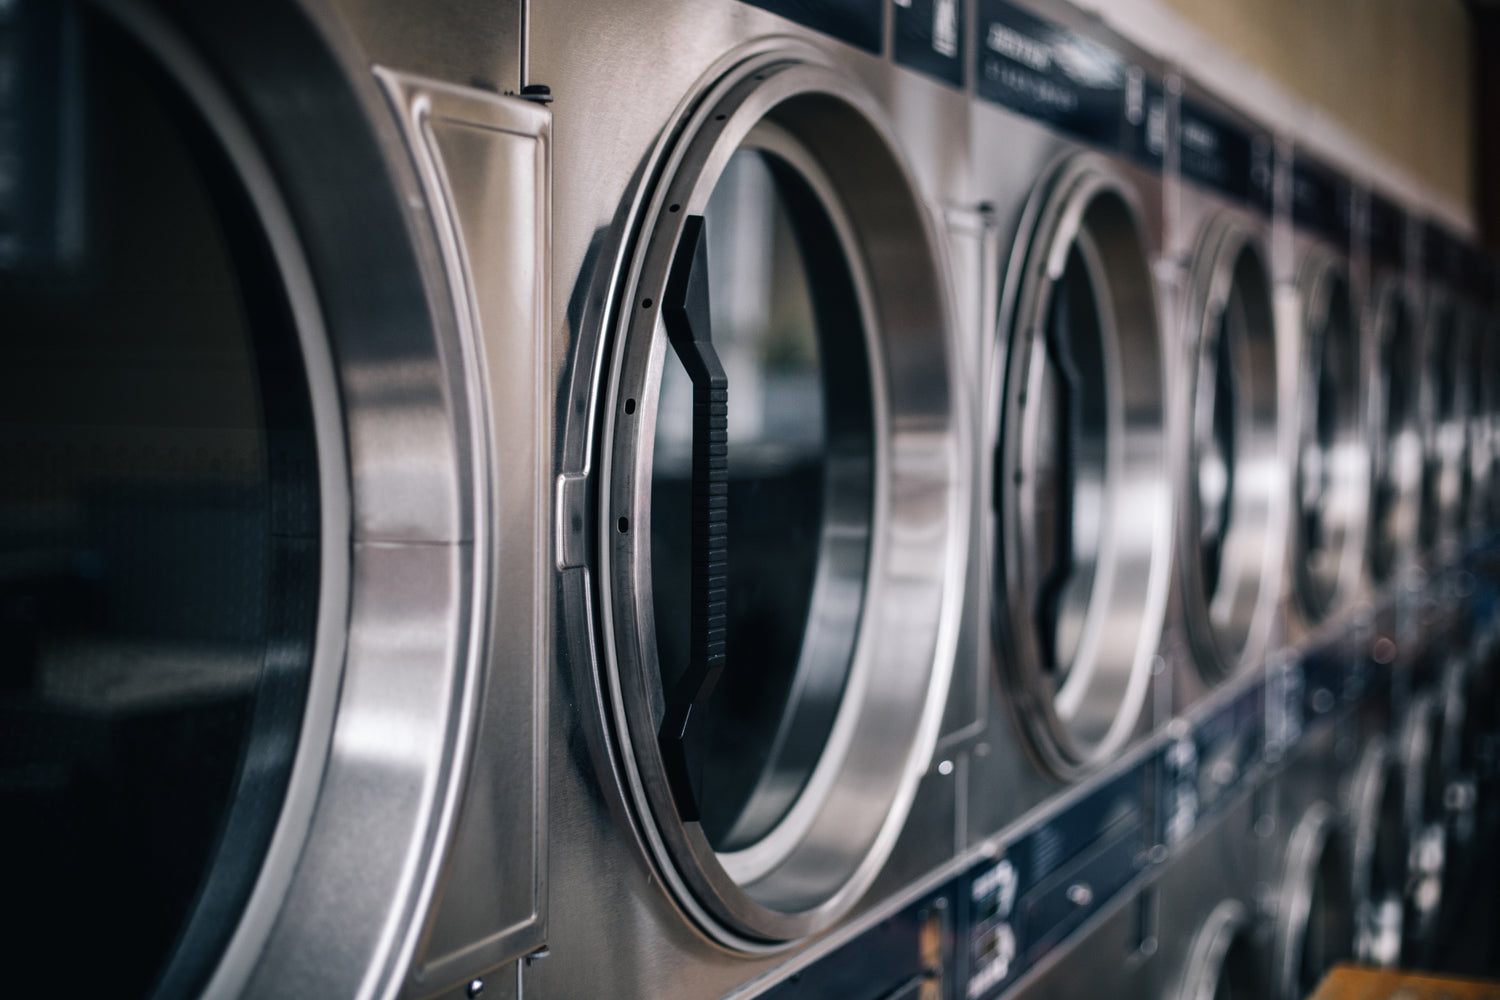 A row of washing machines at a laundrette